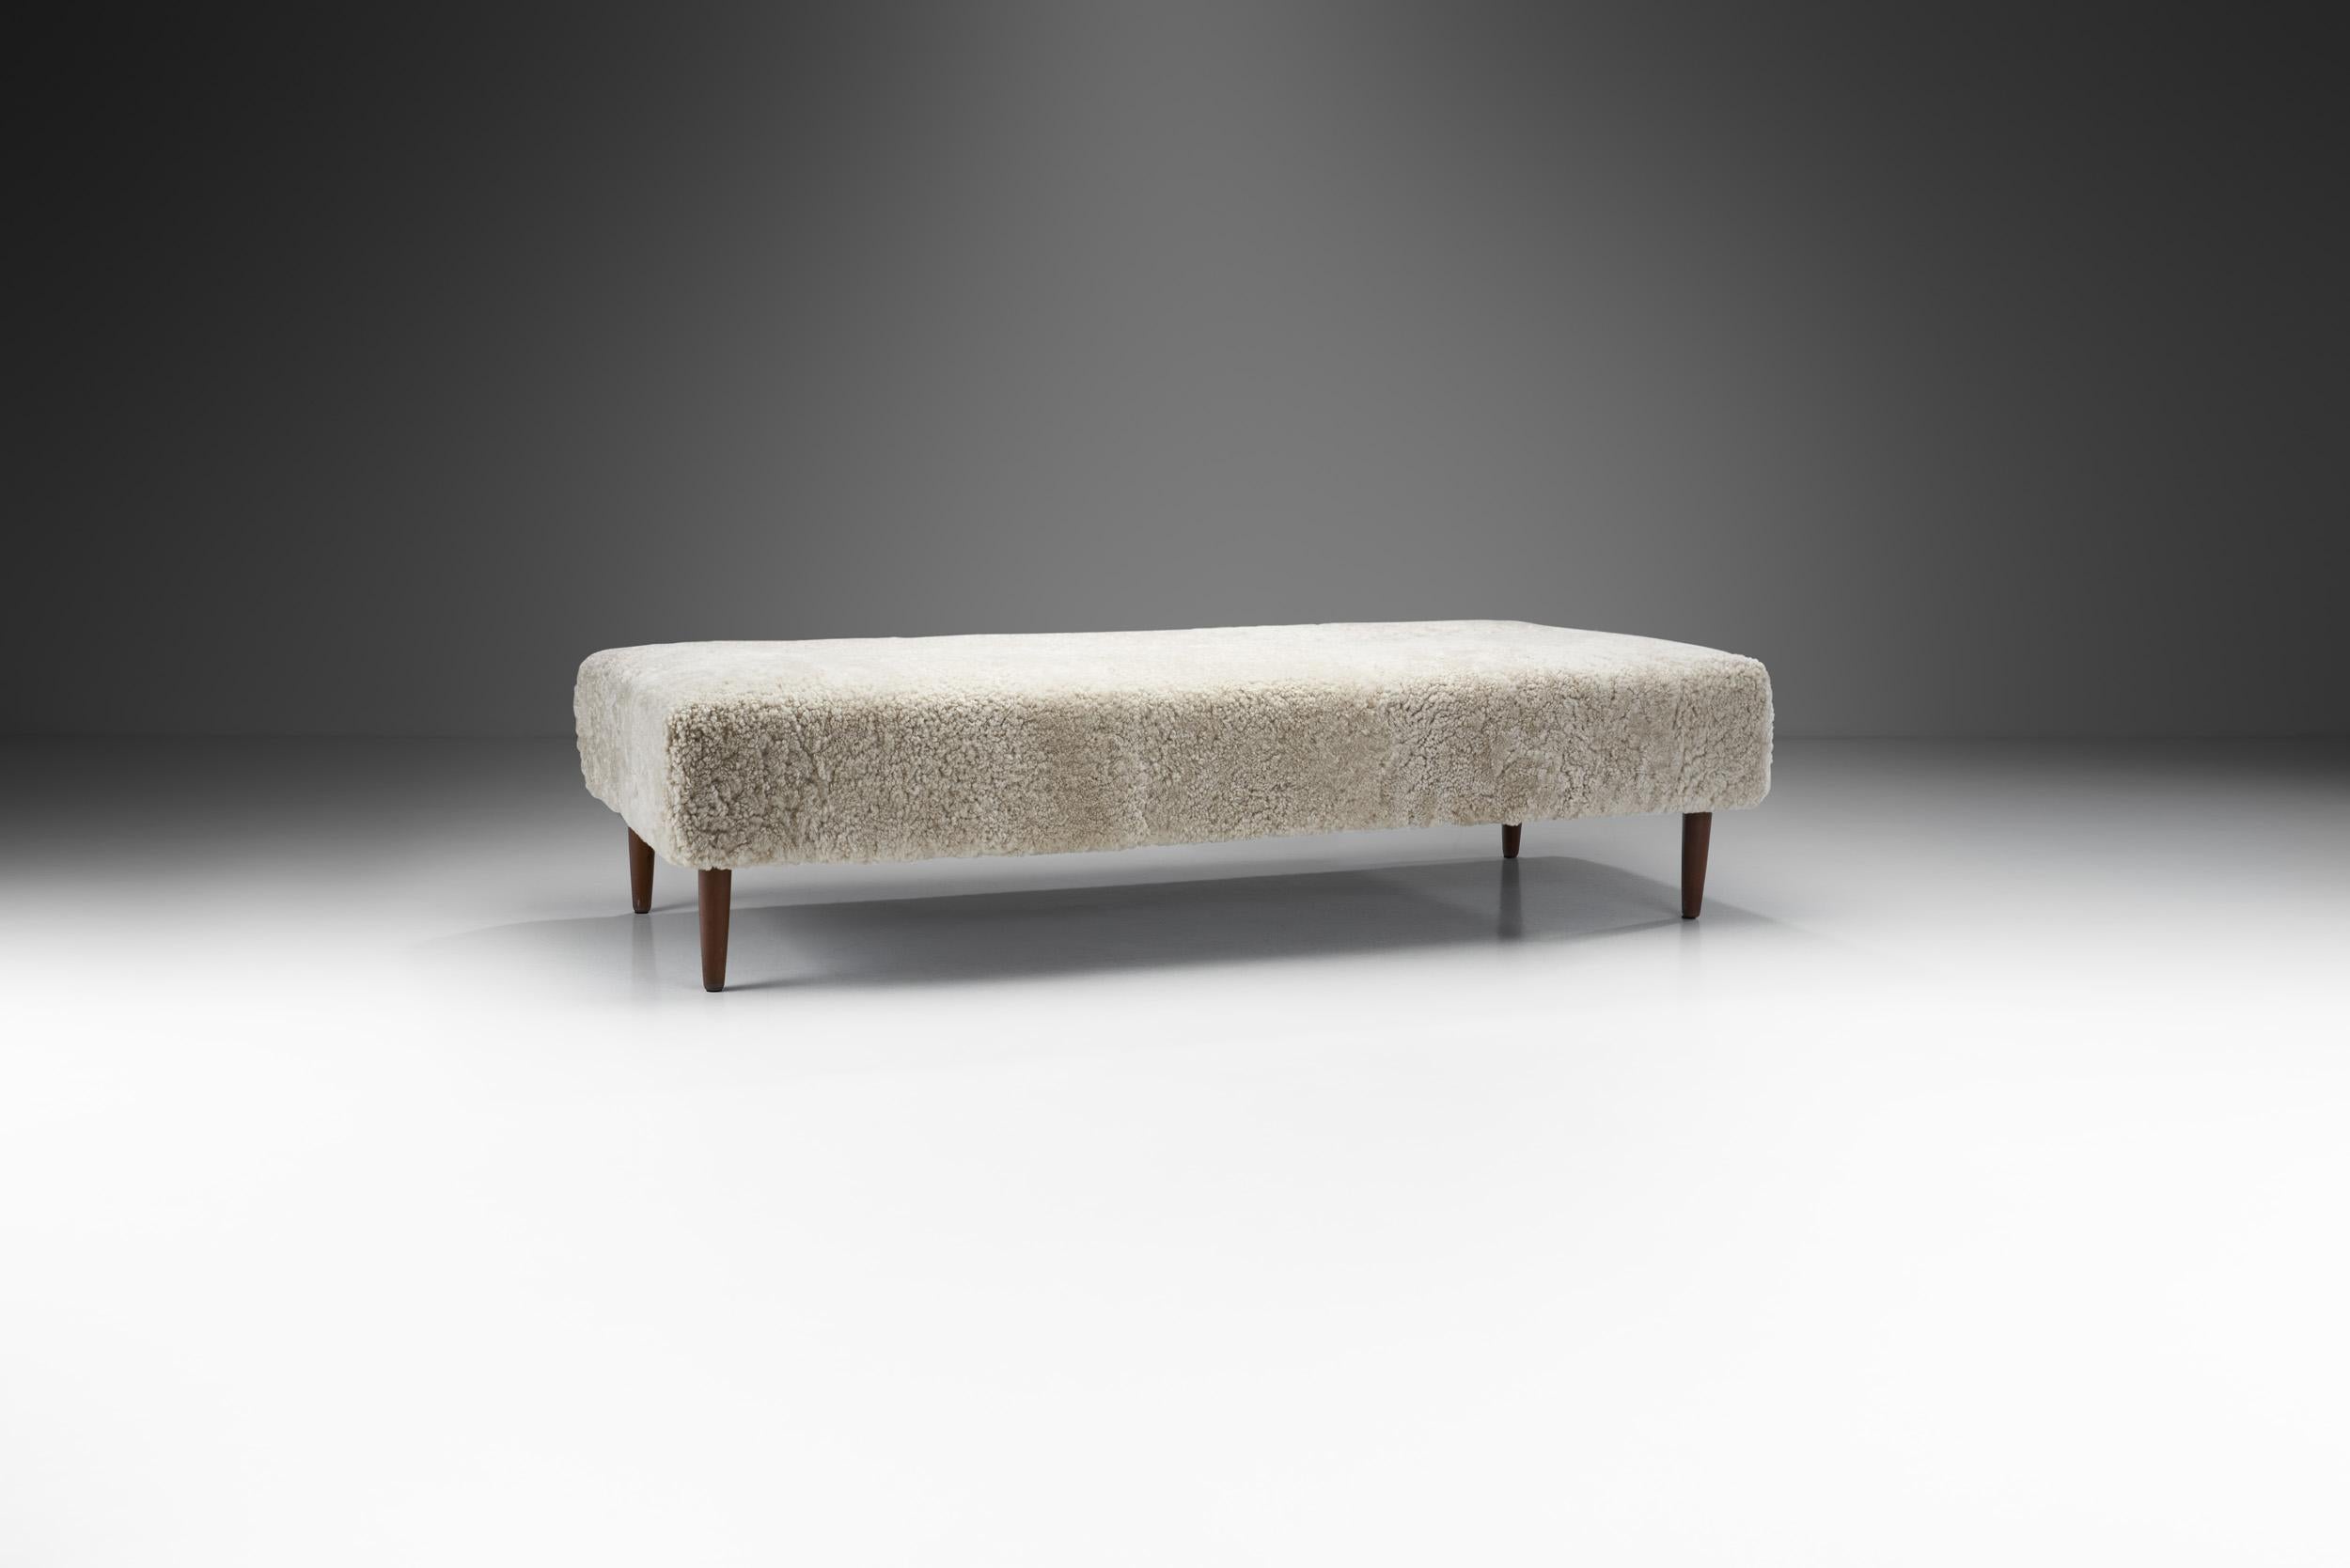 This gorgeous daybed with teak legs was inspired by classic Danish furniture design and simplicity. ‘Danish Modern’ is a recognized term around the world, standing for the characteristic style of Danish design created during the 20th century. Pieces